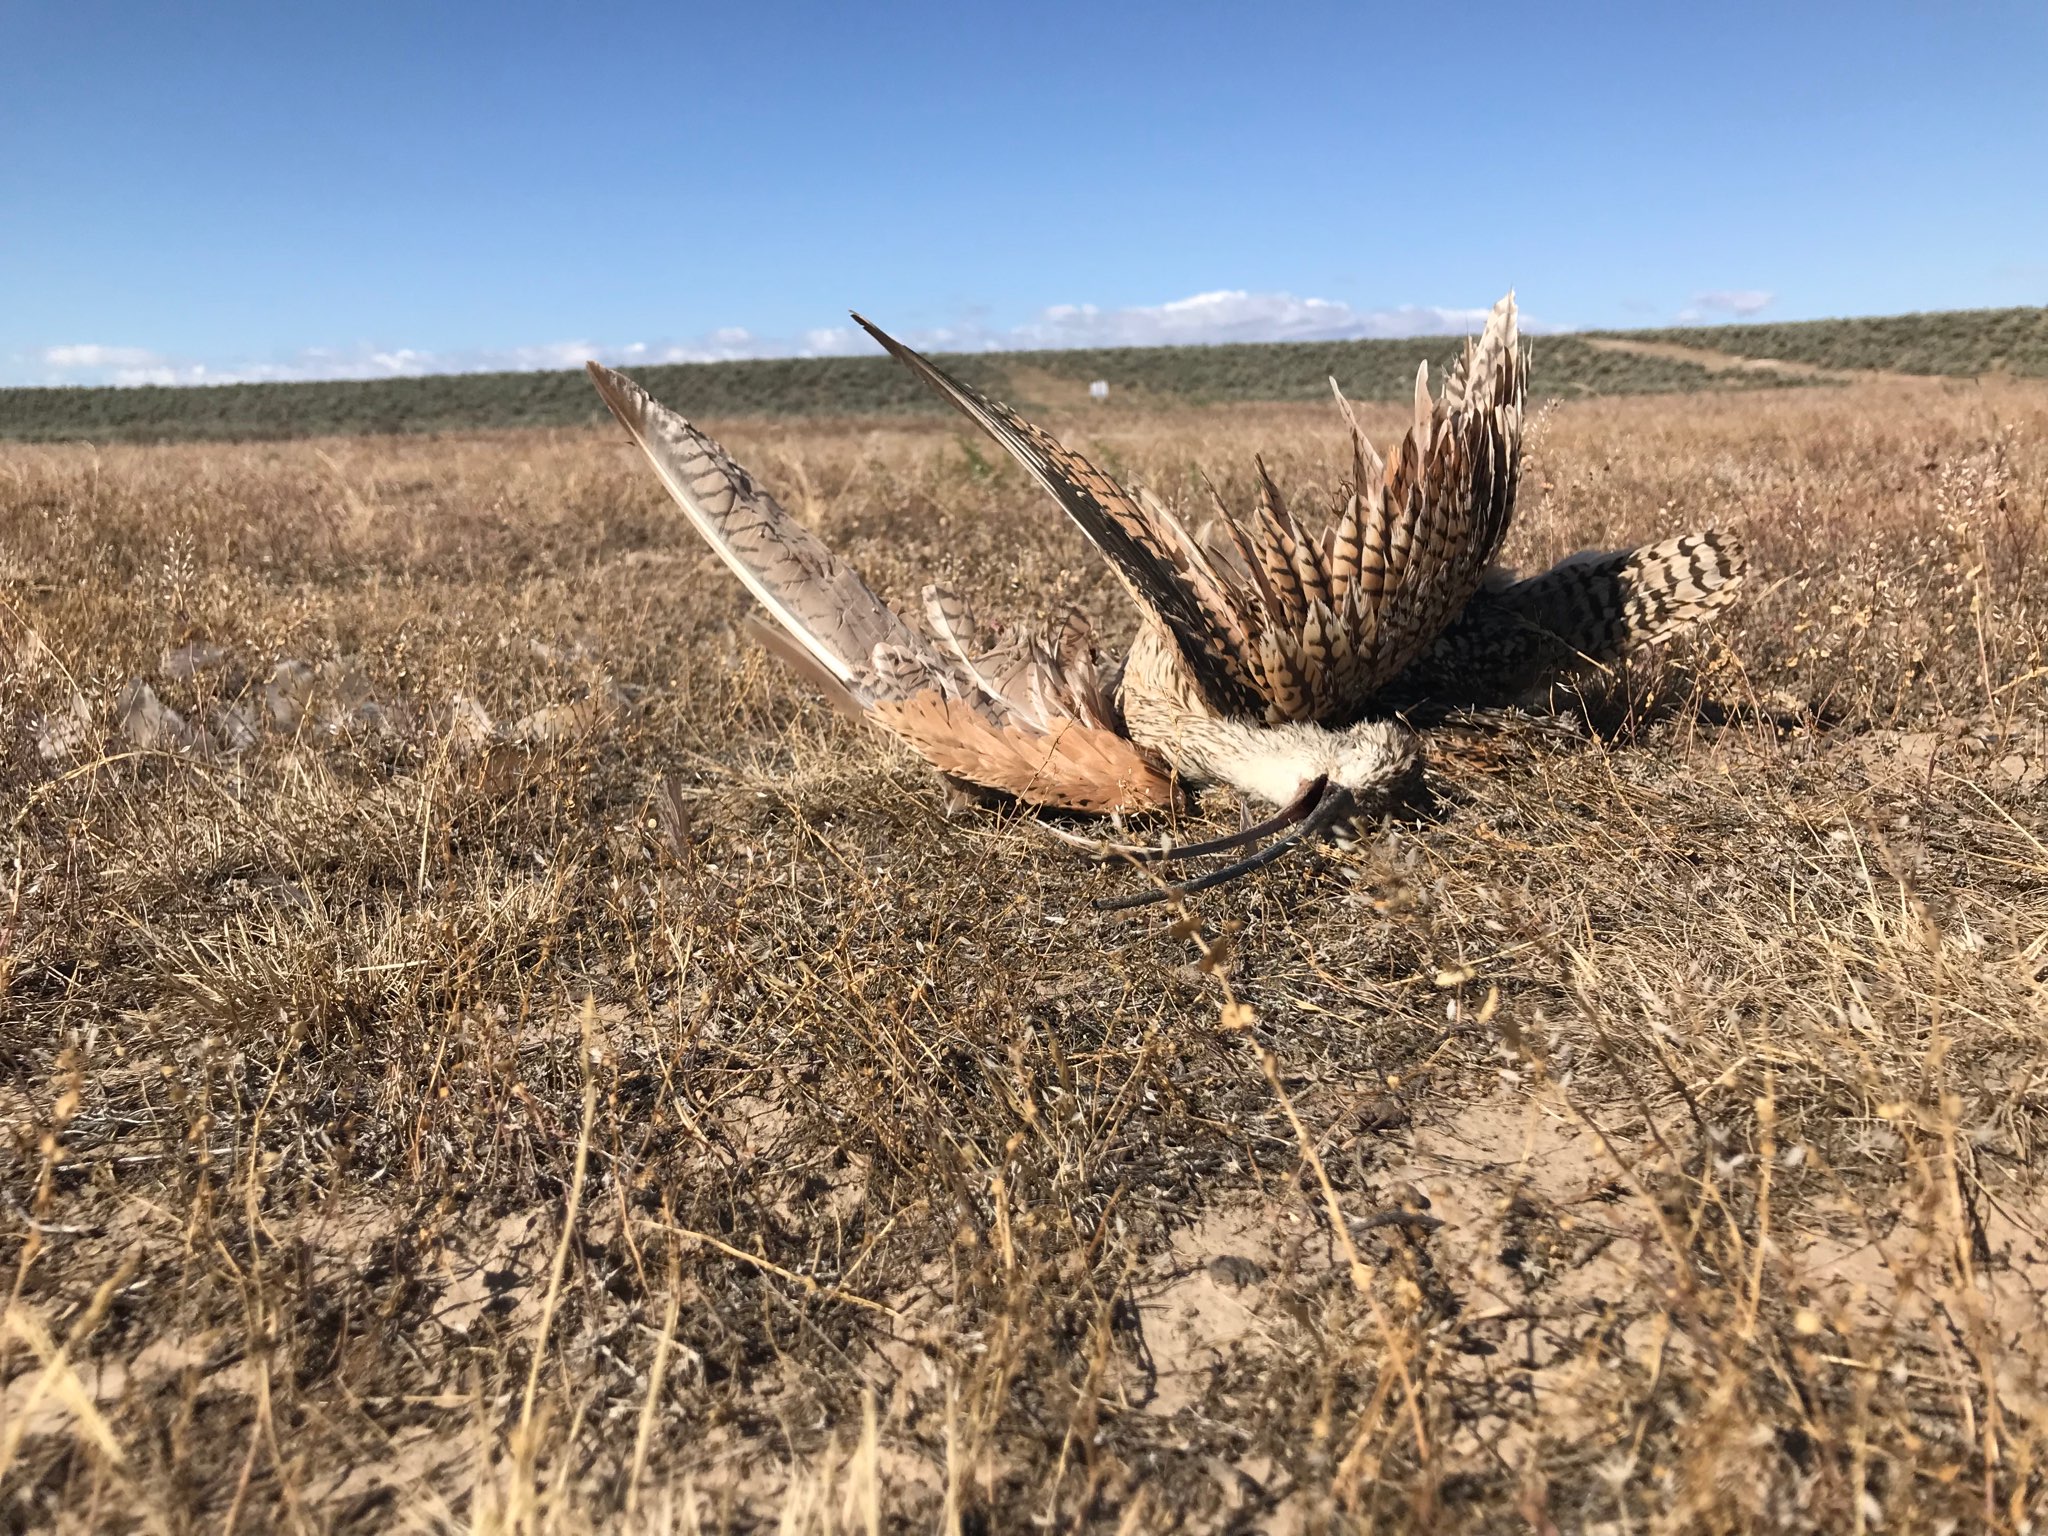 a long-billed curlew lies dead, with feathers tattered, bill open, and eyes closed tightly. she's laying on weedy dry ground with the hot summer sun beating down on her lifeless body